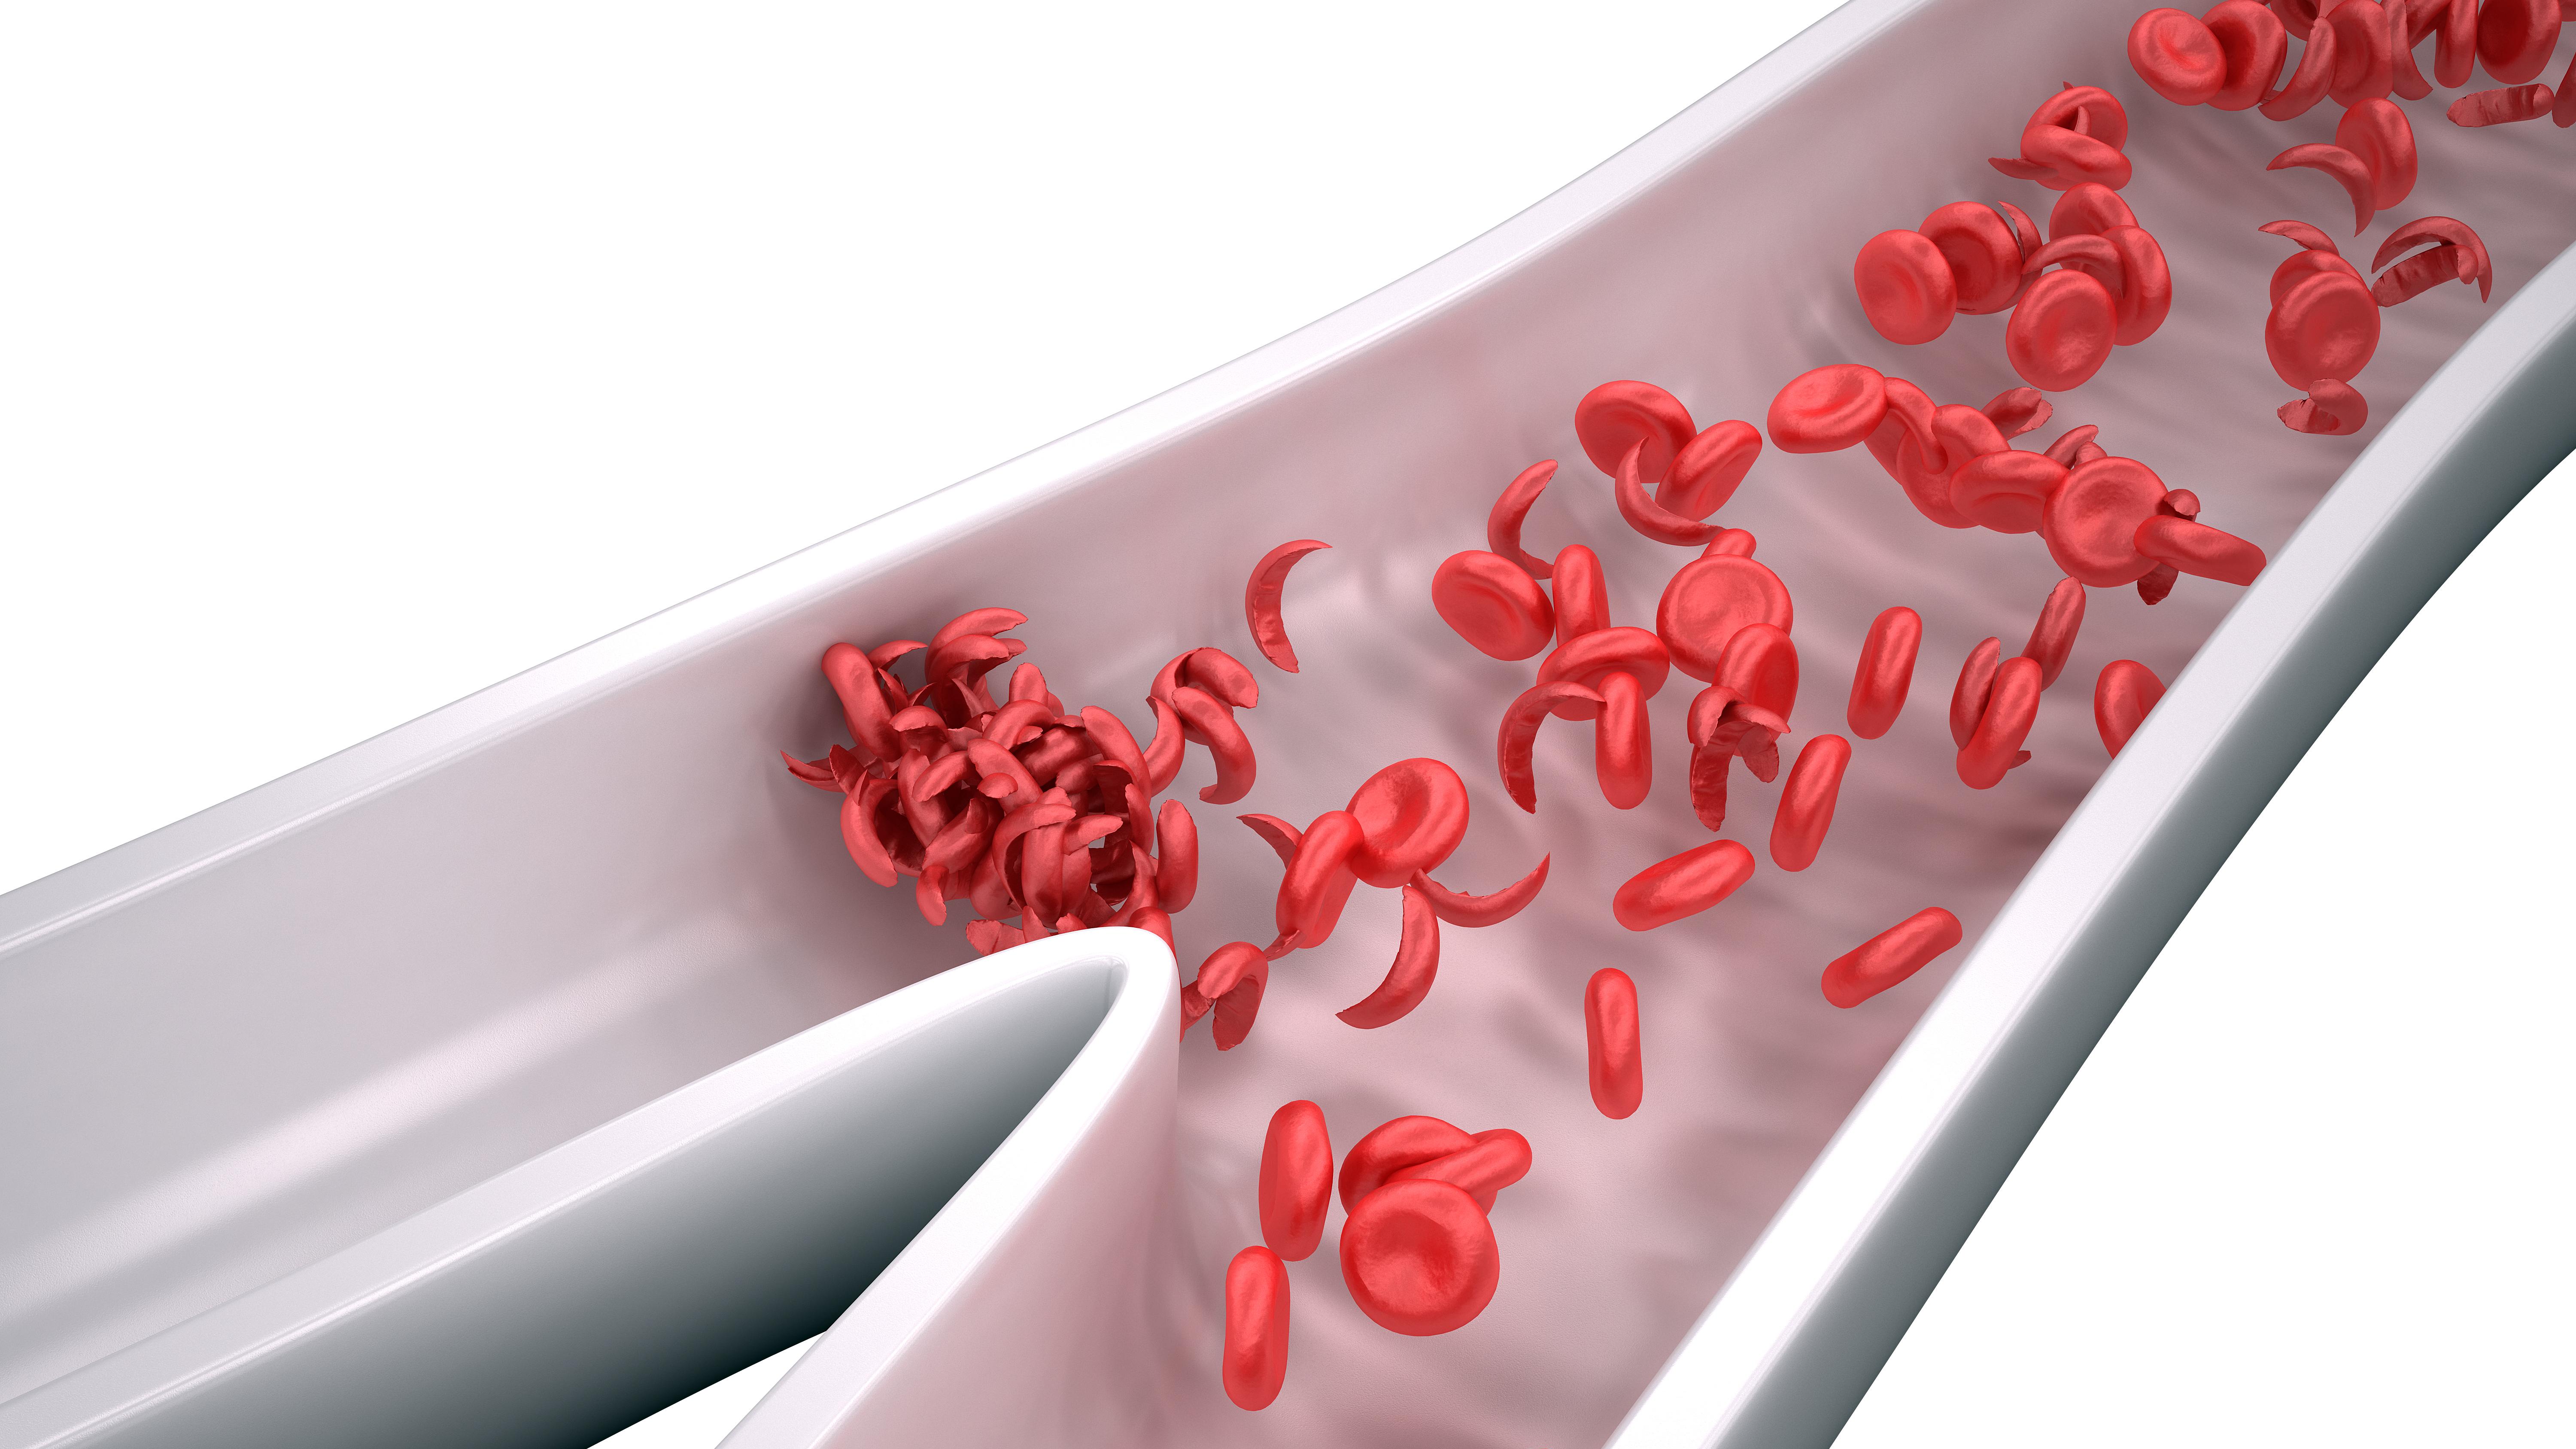 Webinar Series: Sickle Cell Science: Path To Progress – Bone Marrow Transplants, Other Therapies, And Sickle Cell Disease 